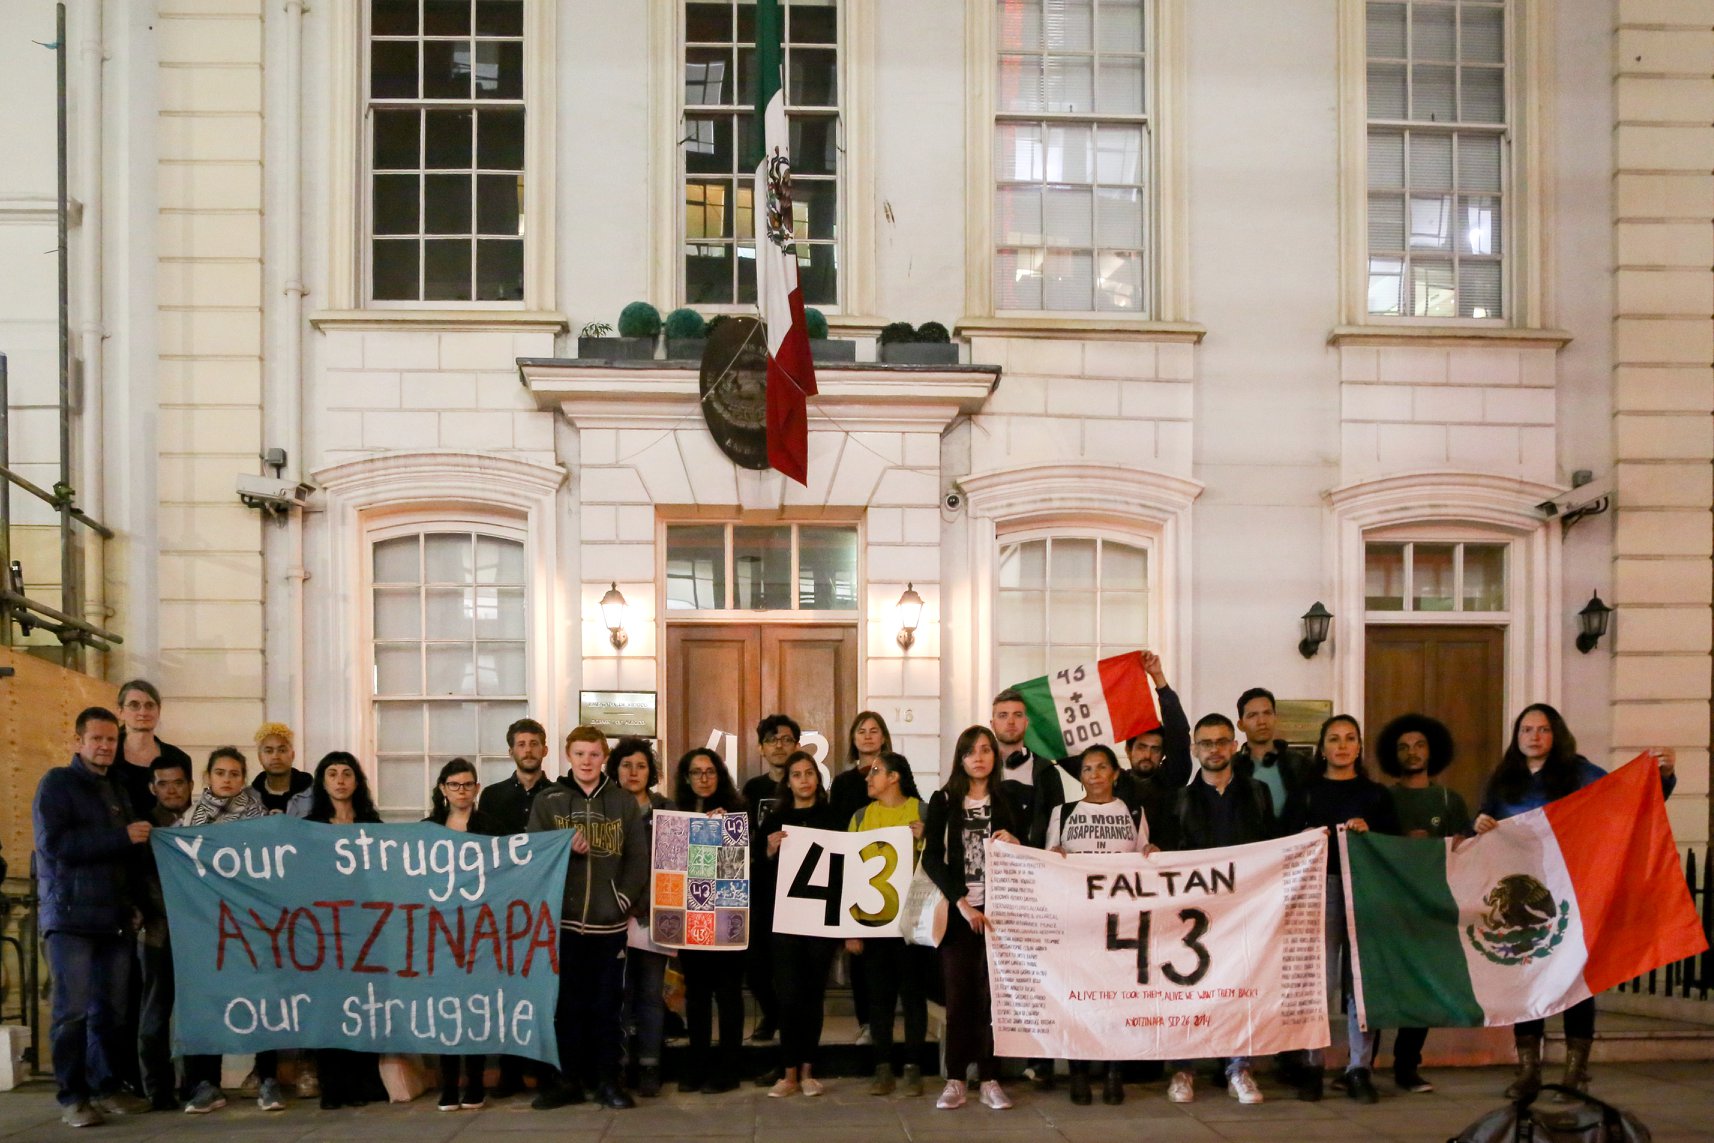 Protest outside Mexican embassy calling for justice for 43 students that were disappeared